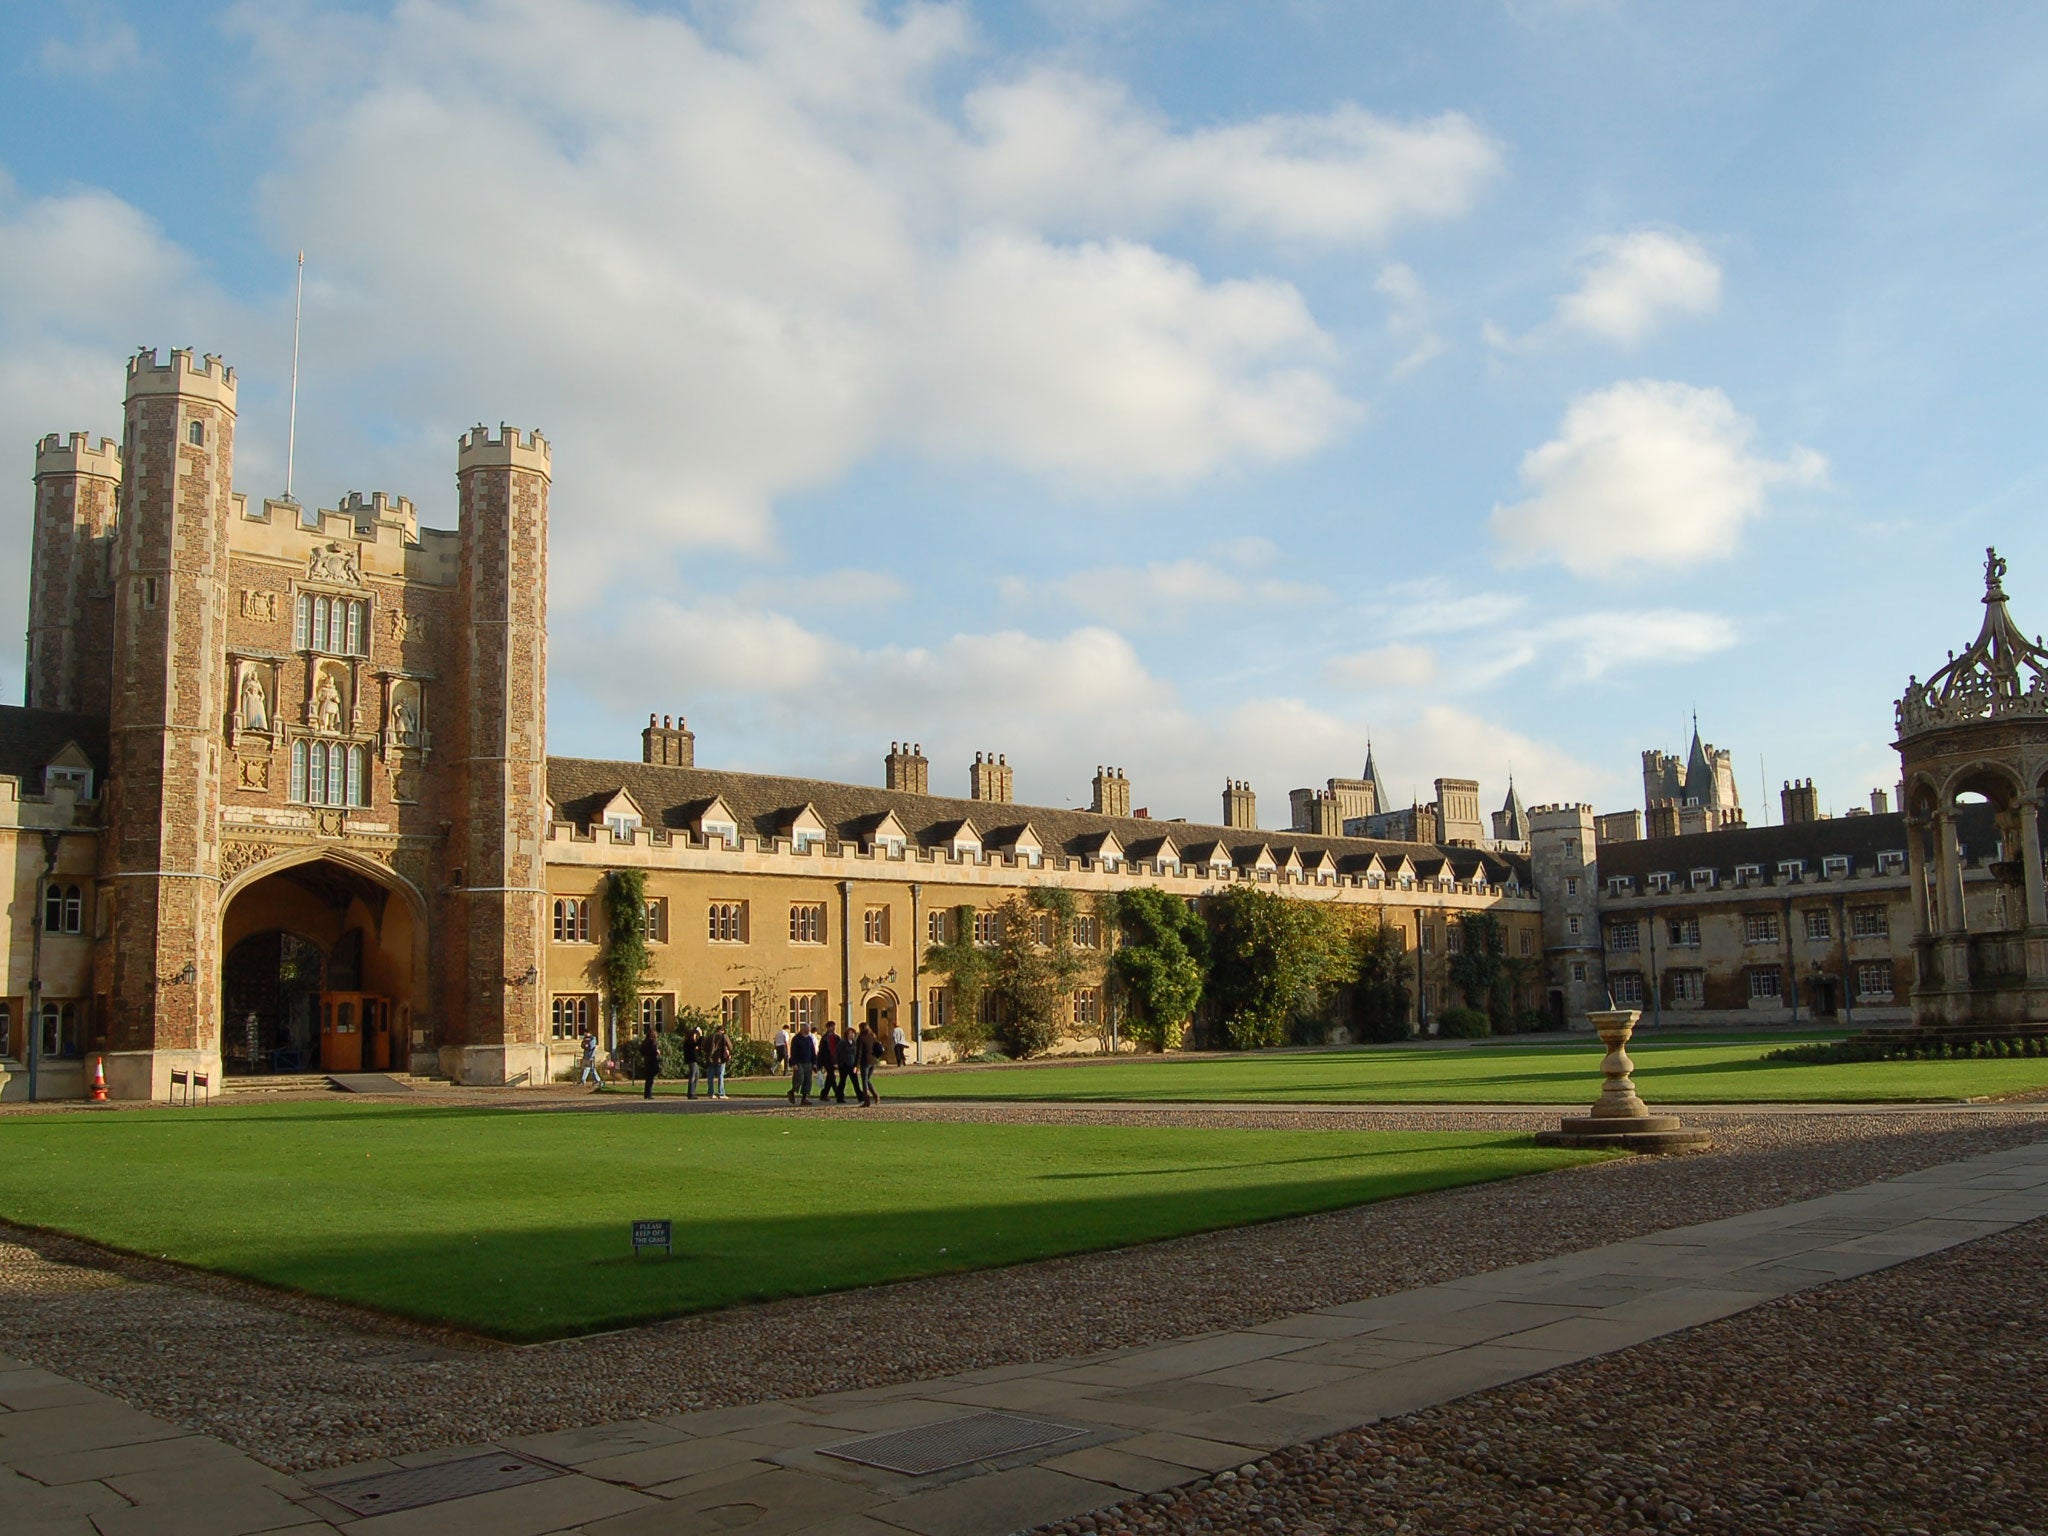 The university city of Cambridge has been named as having the hottest property market in Britain - beating even London